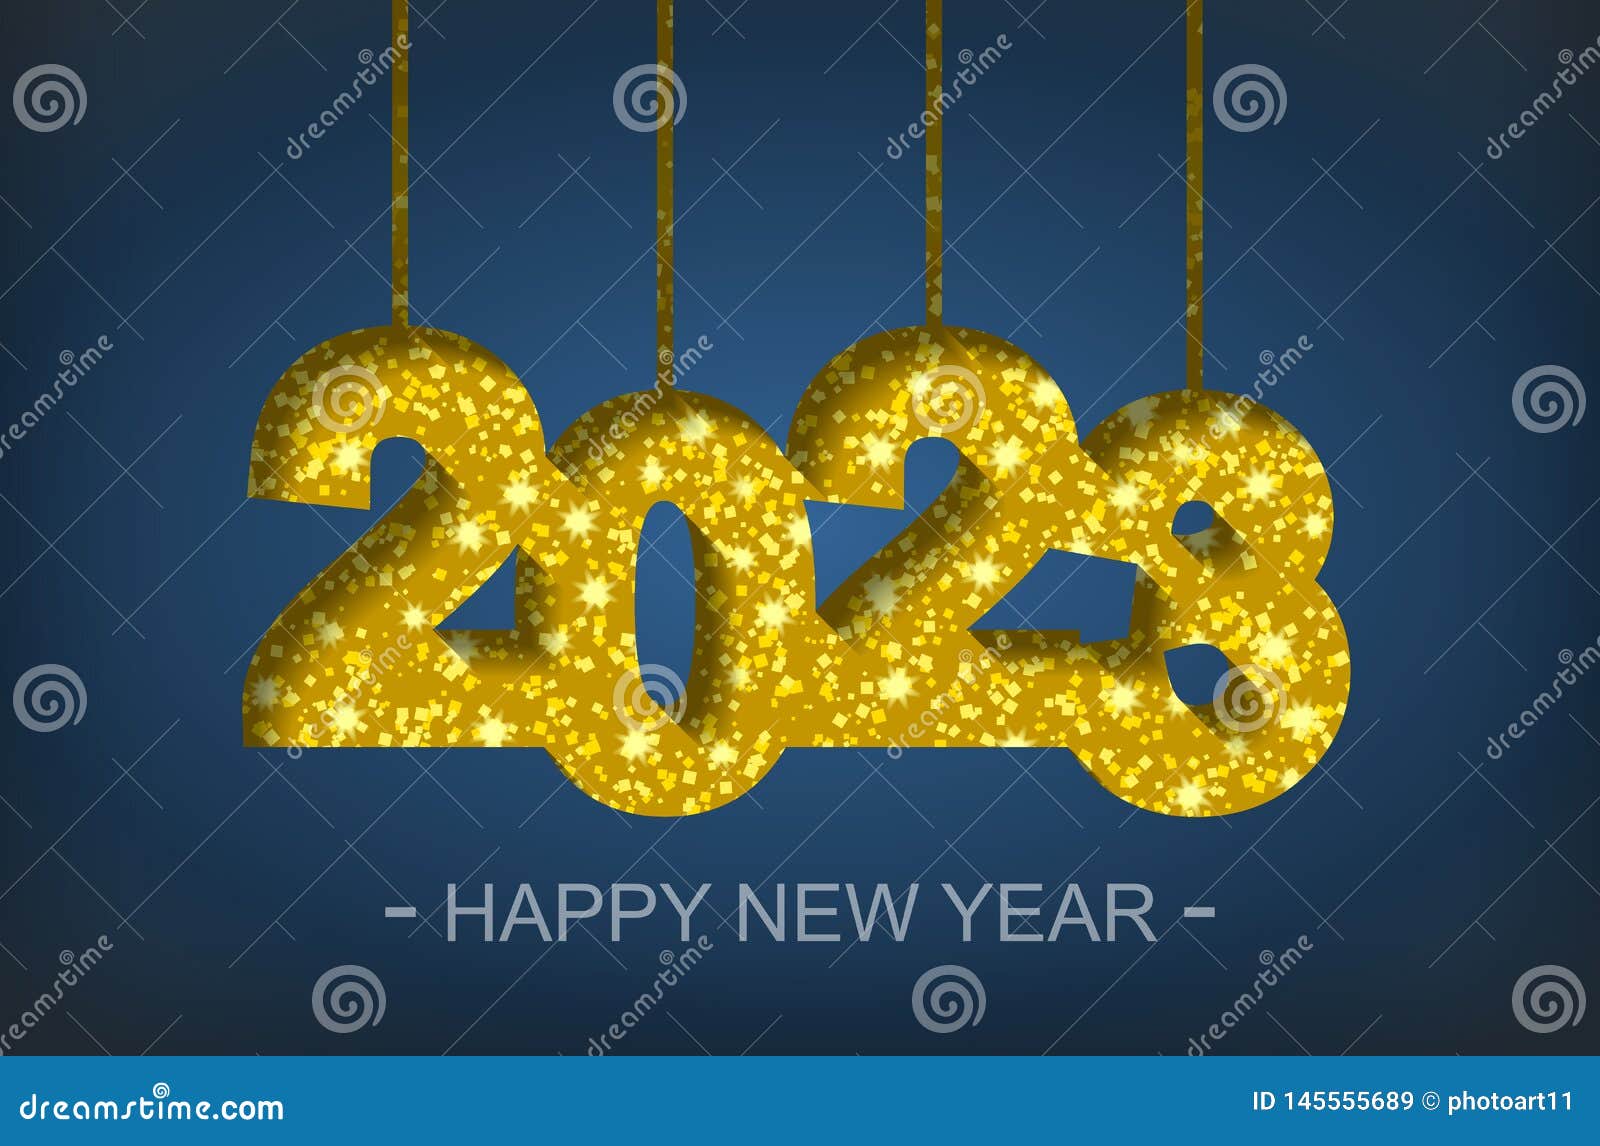 Happy New Year 2023 - Greeting Card, Flyer, Invitation - Vector Stock